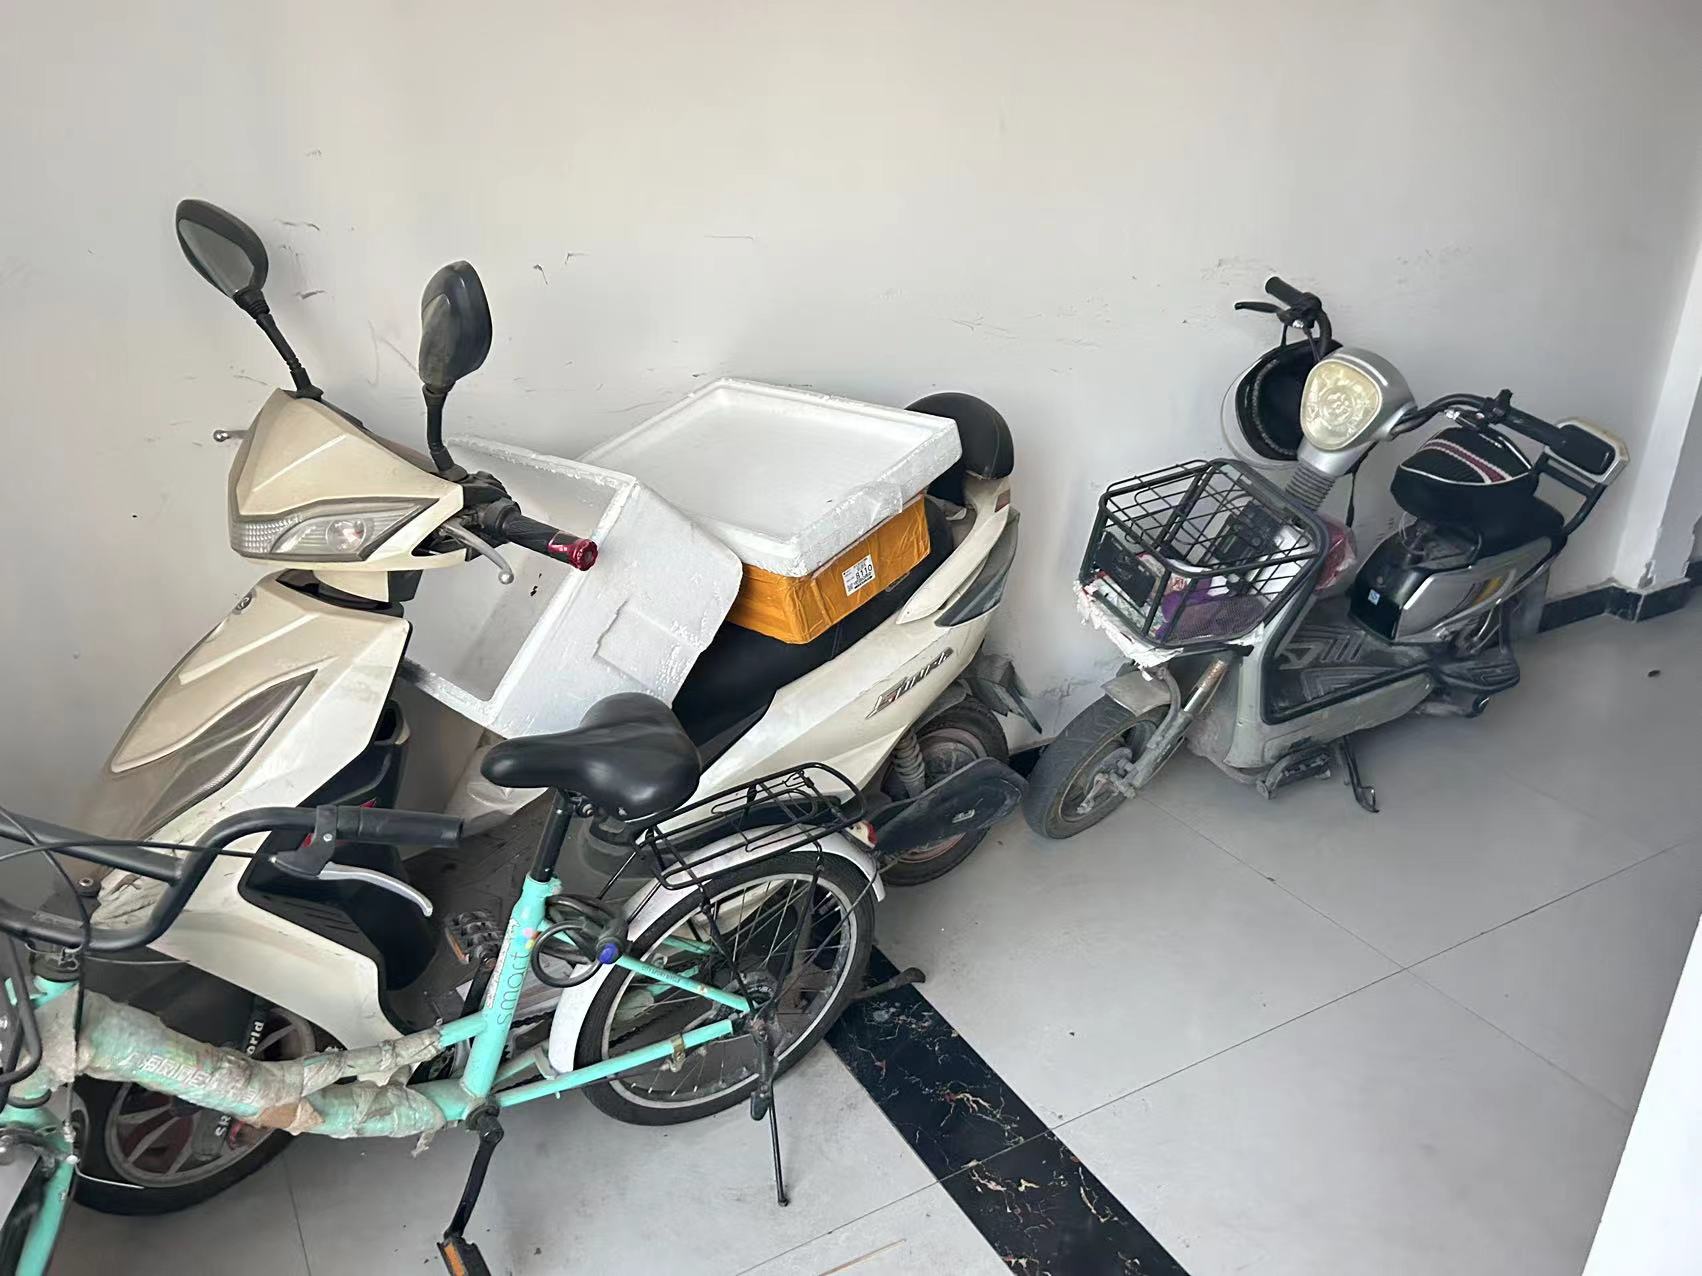  On March 20, people in Dongping County reported that there were still electric vehicles parked in the corridor. (Courtesy of respondents)